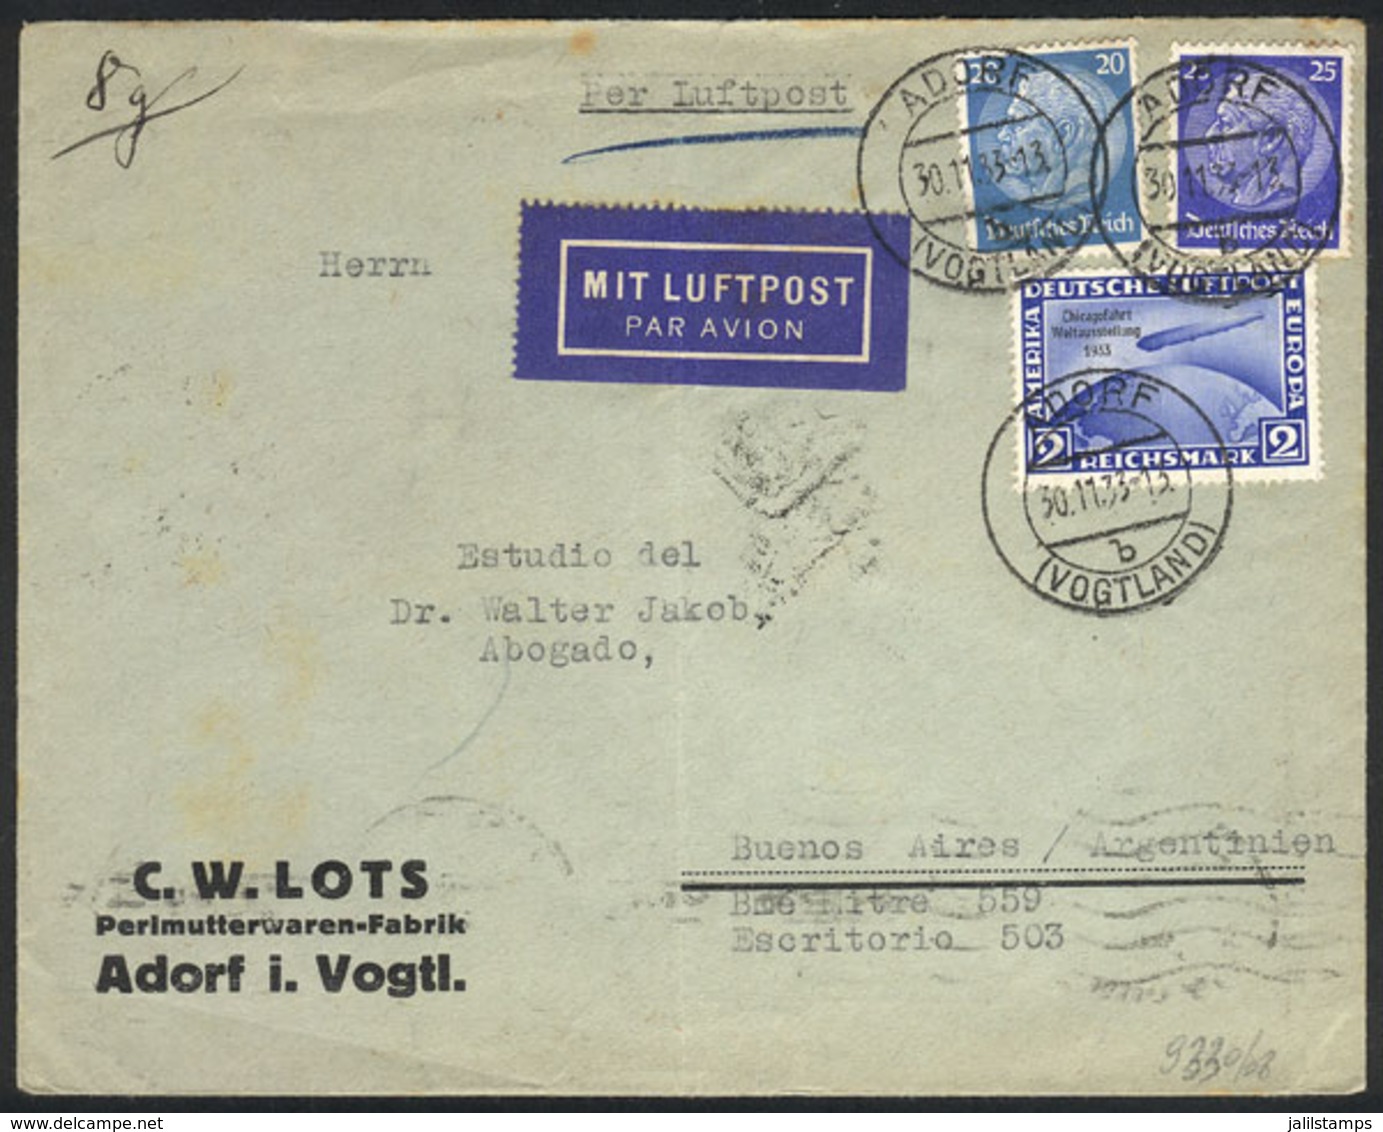 GERMANY: Airmail Cover Franked By Sc.C44 + Other Values (value US$275 On Cover), Sent From Adorf To Buenos Aires On 30/N - Precursores